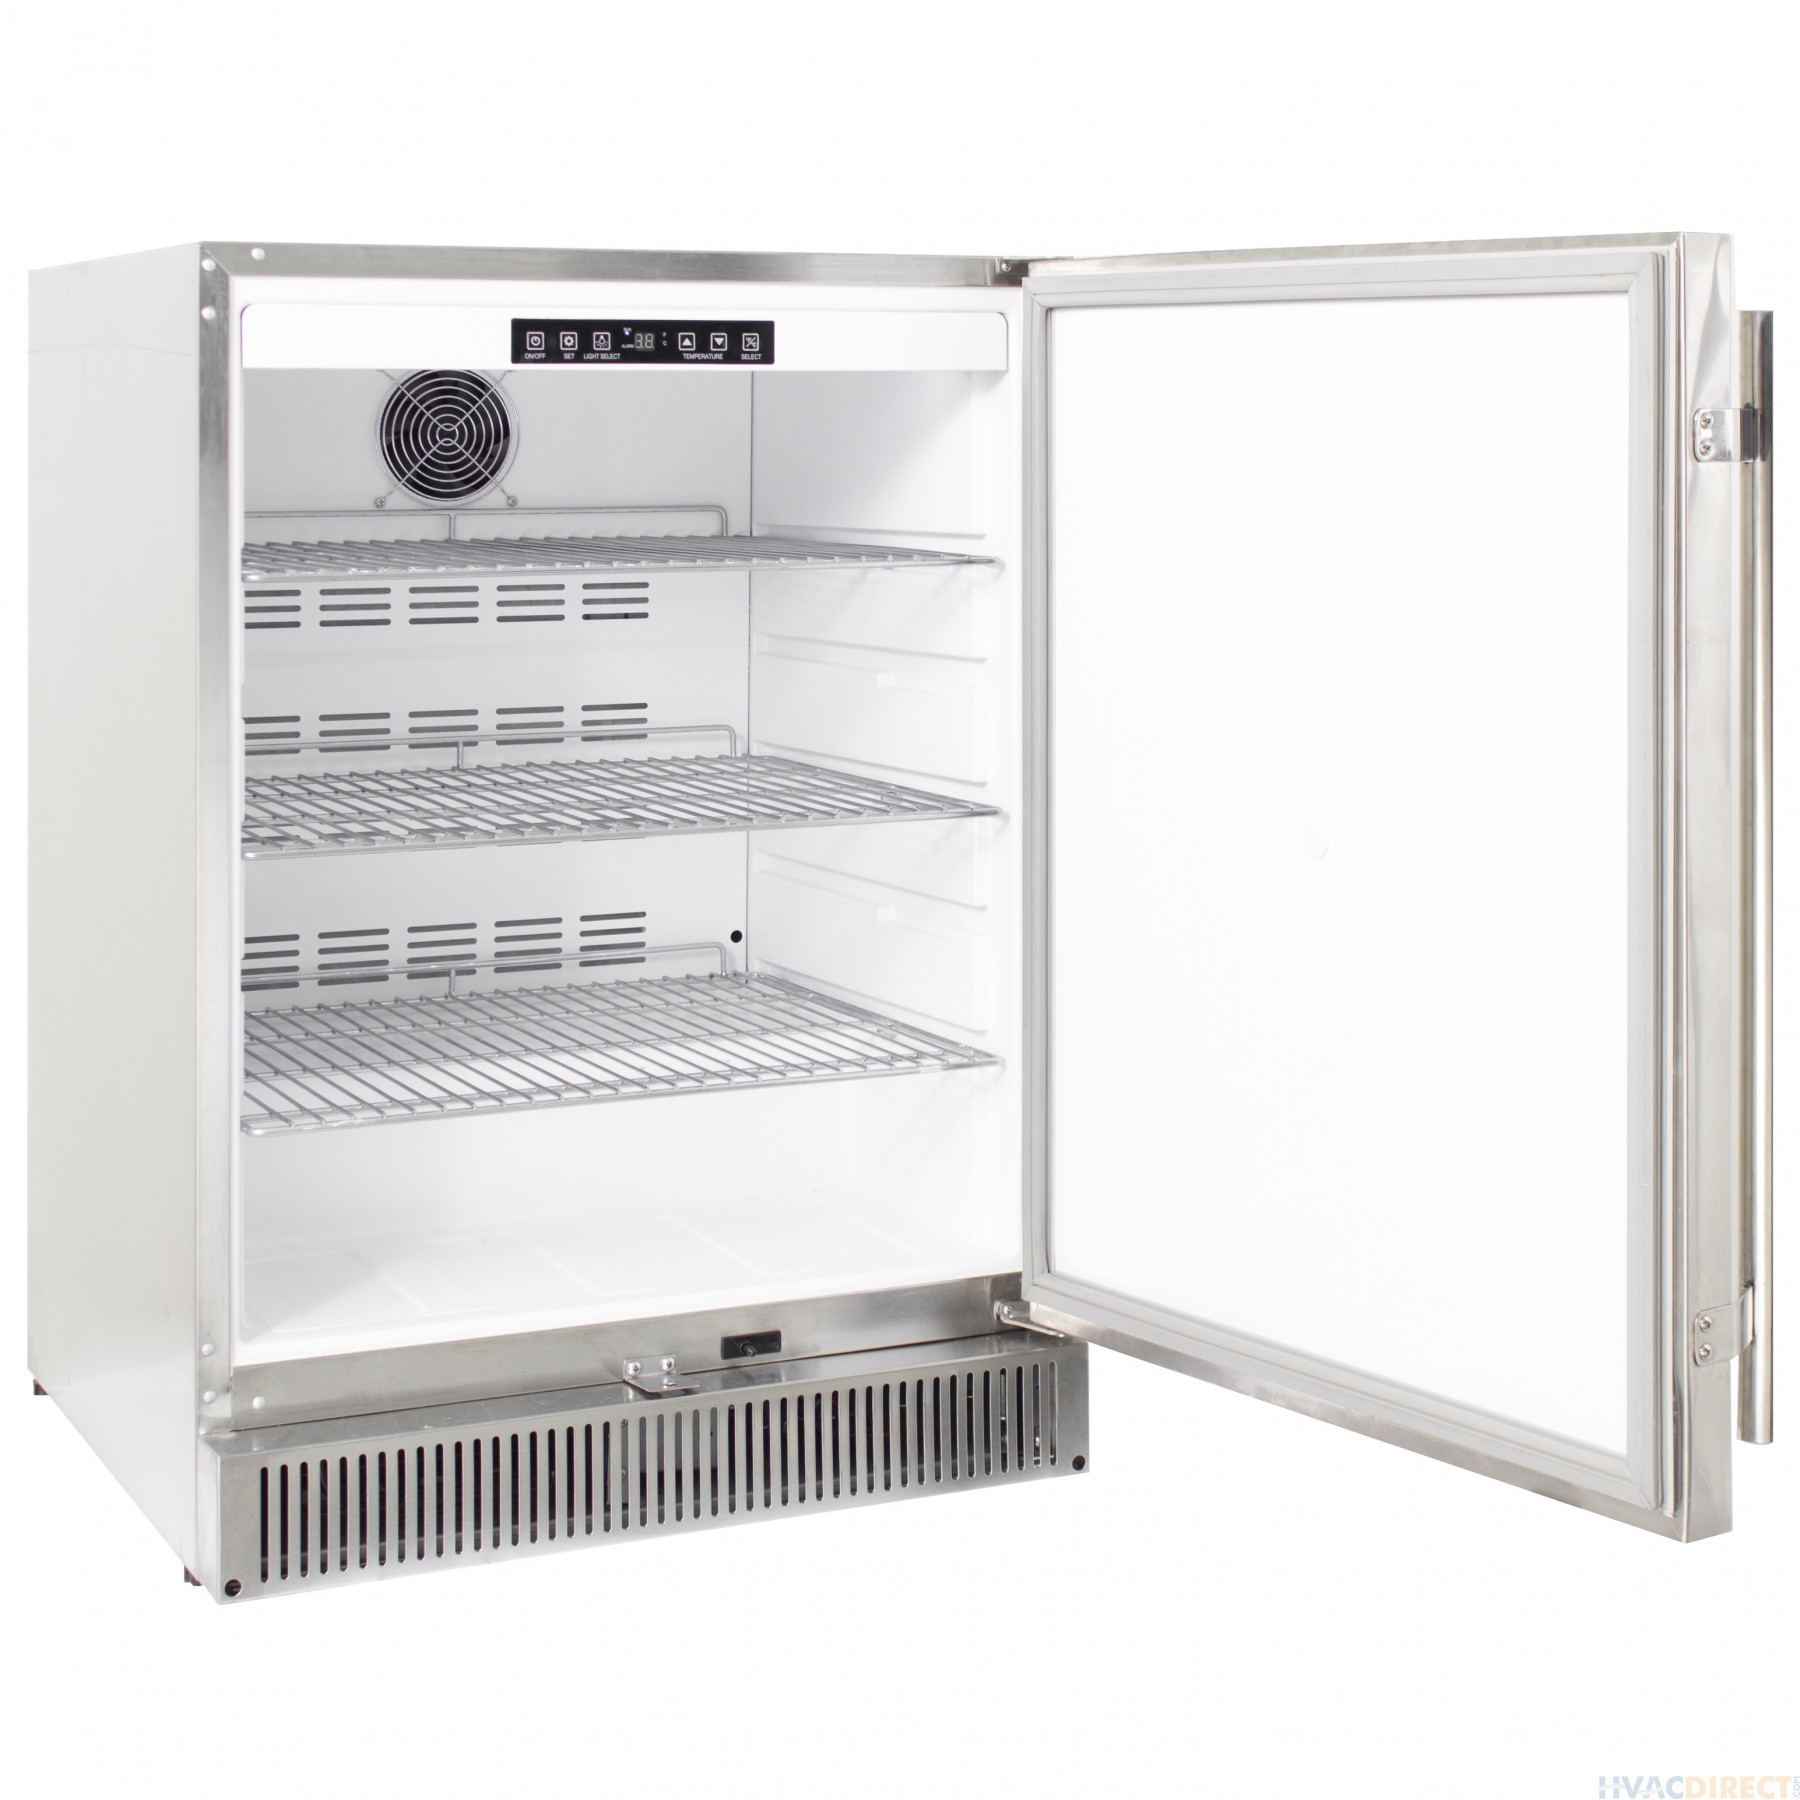 Blaze Outdoor Rated Stainless 24 Inch Fridge 5.5 Cubic Feet